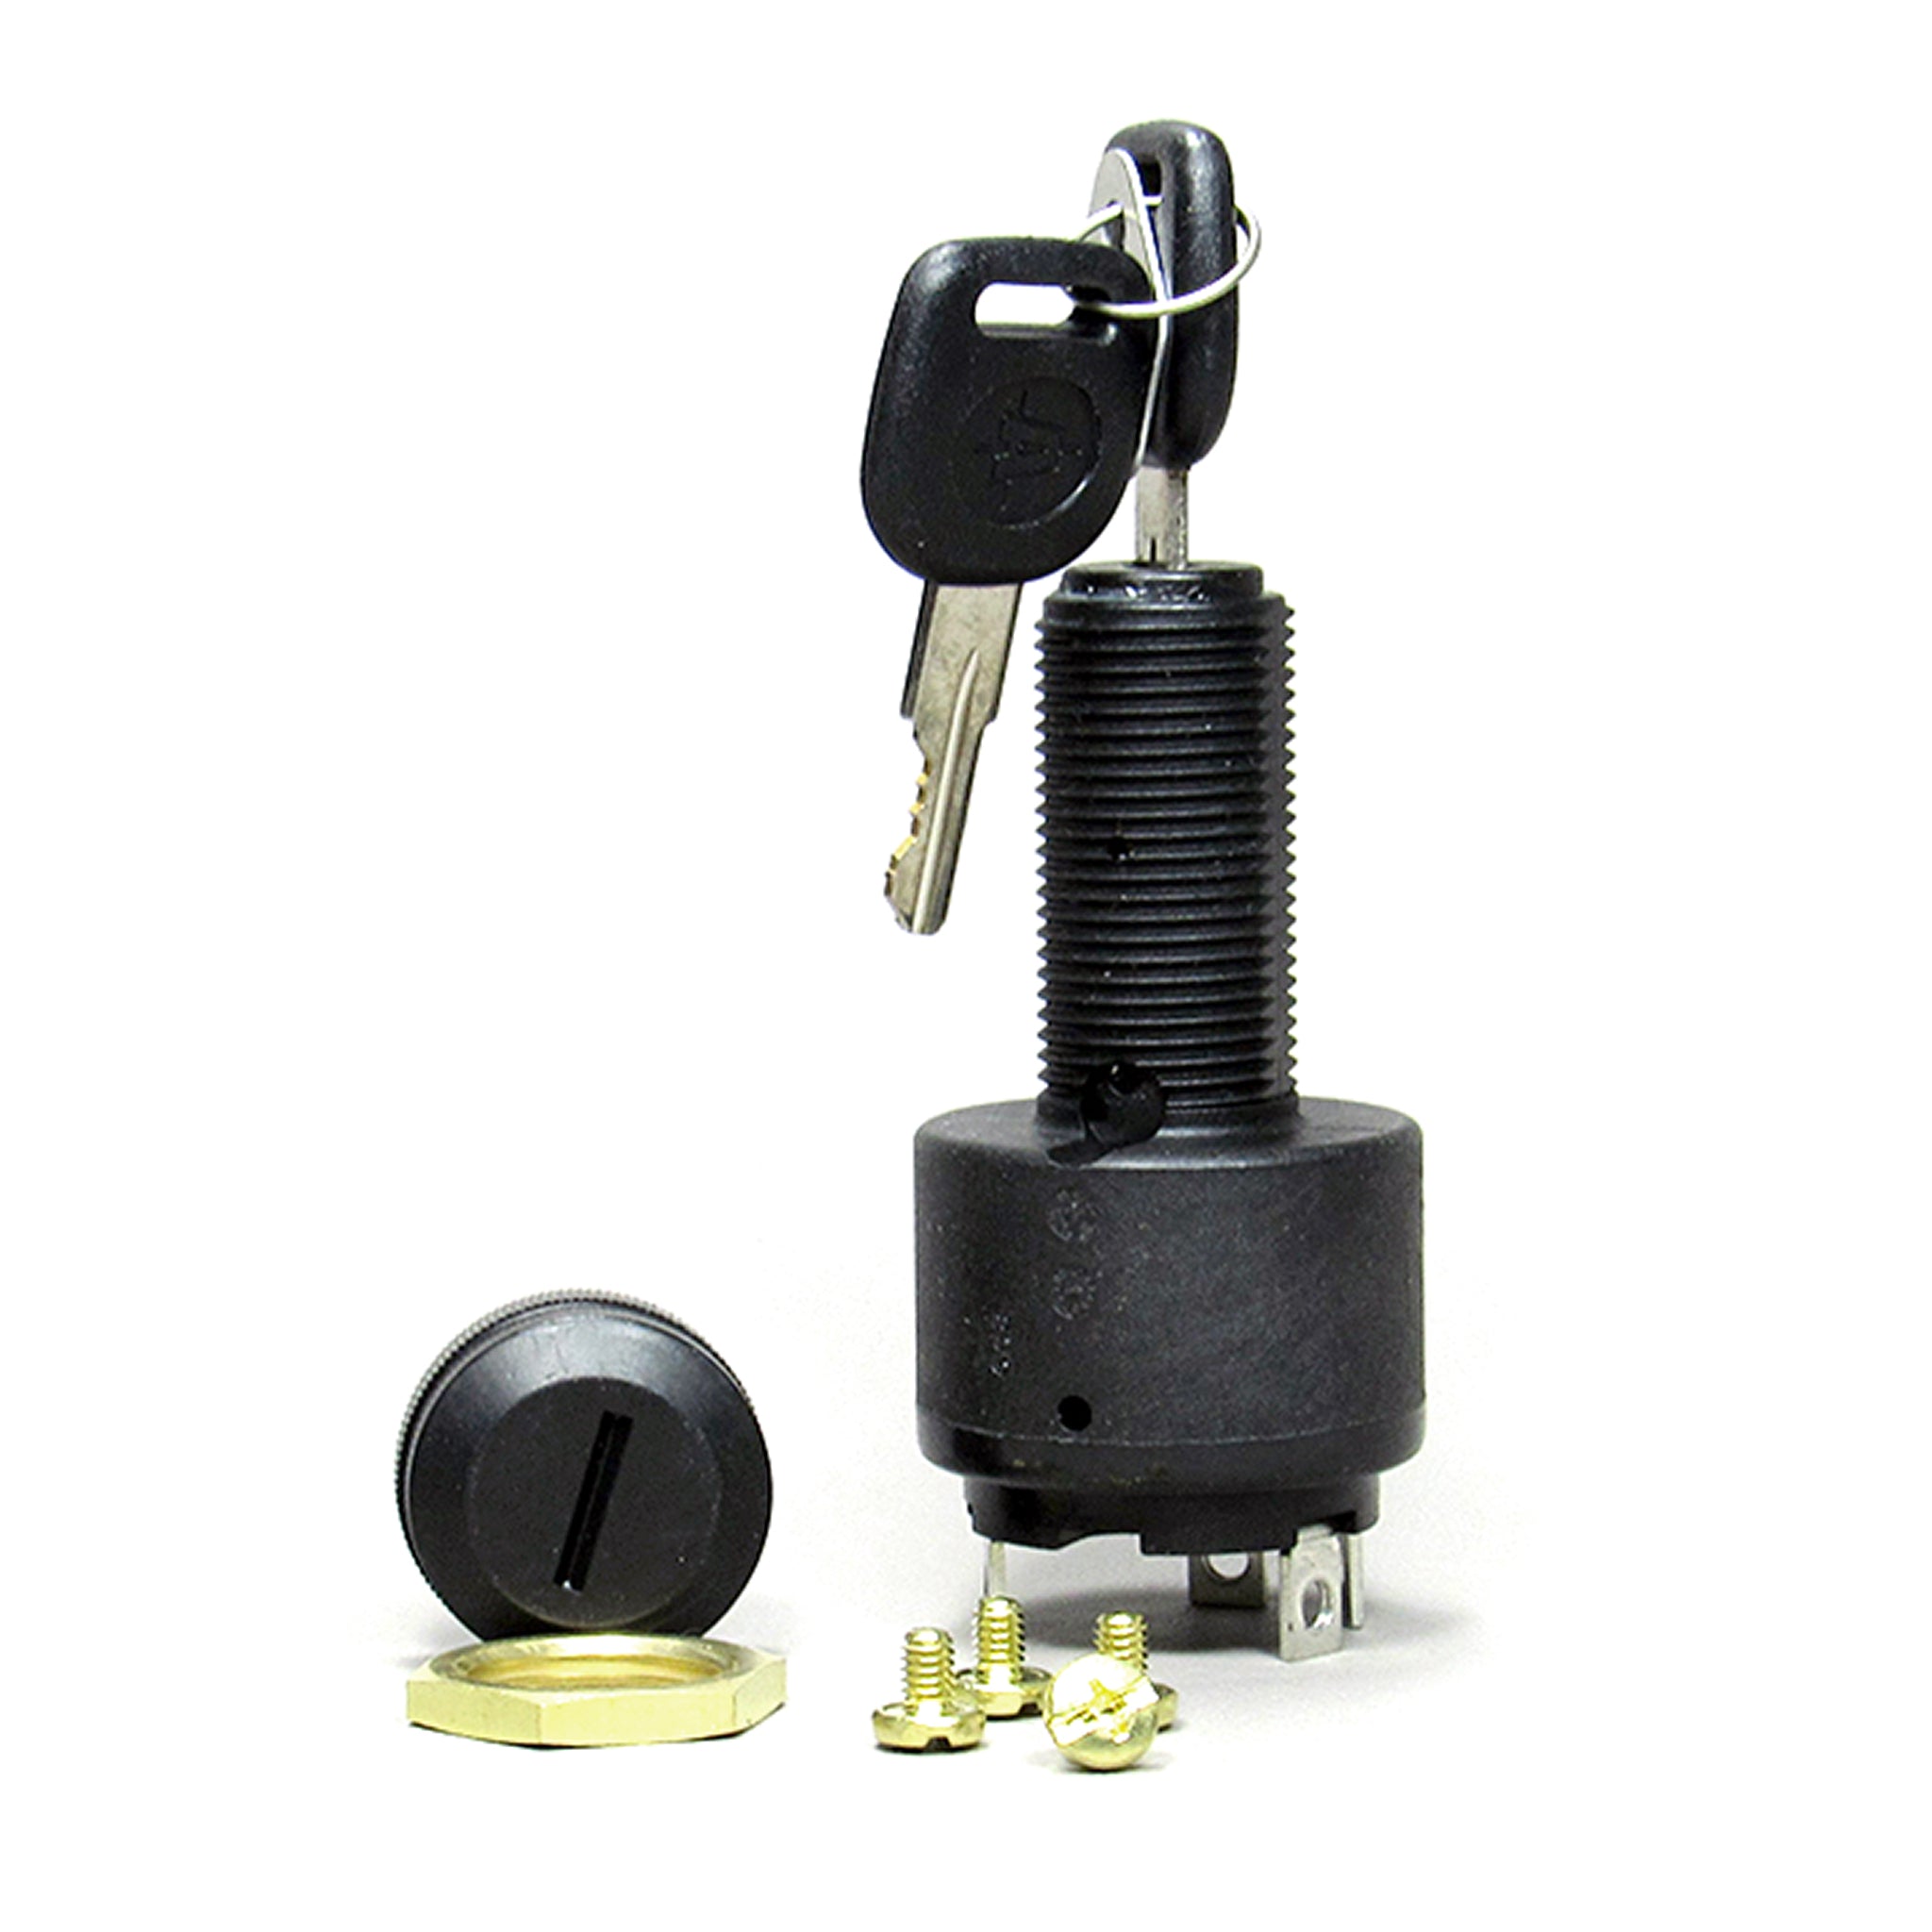 Axis ignition switch